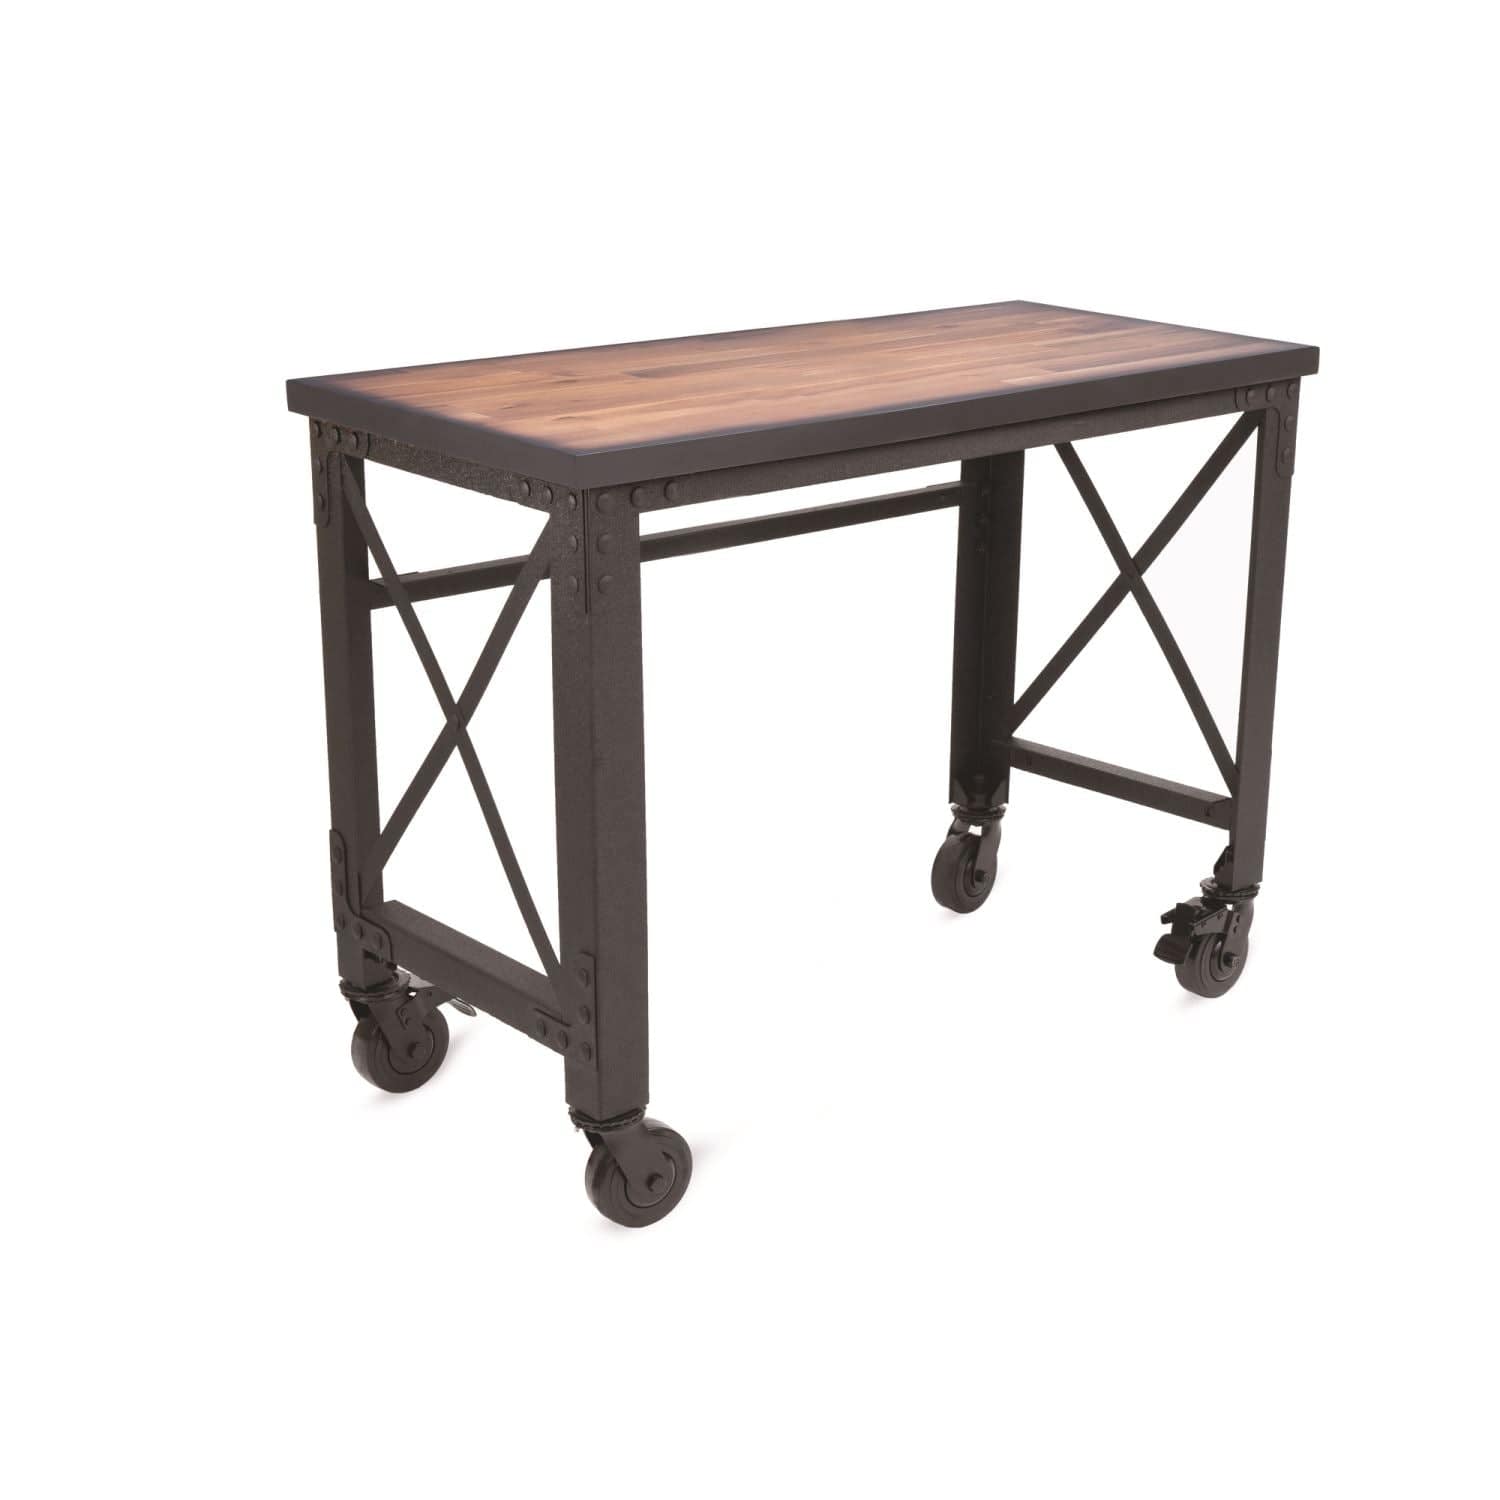 Duramax Furnitures DuraMax | 46 In. x 24 In. Rolling Industrial Worktable Desk With Solid Wood Top 68023